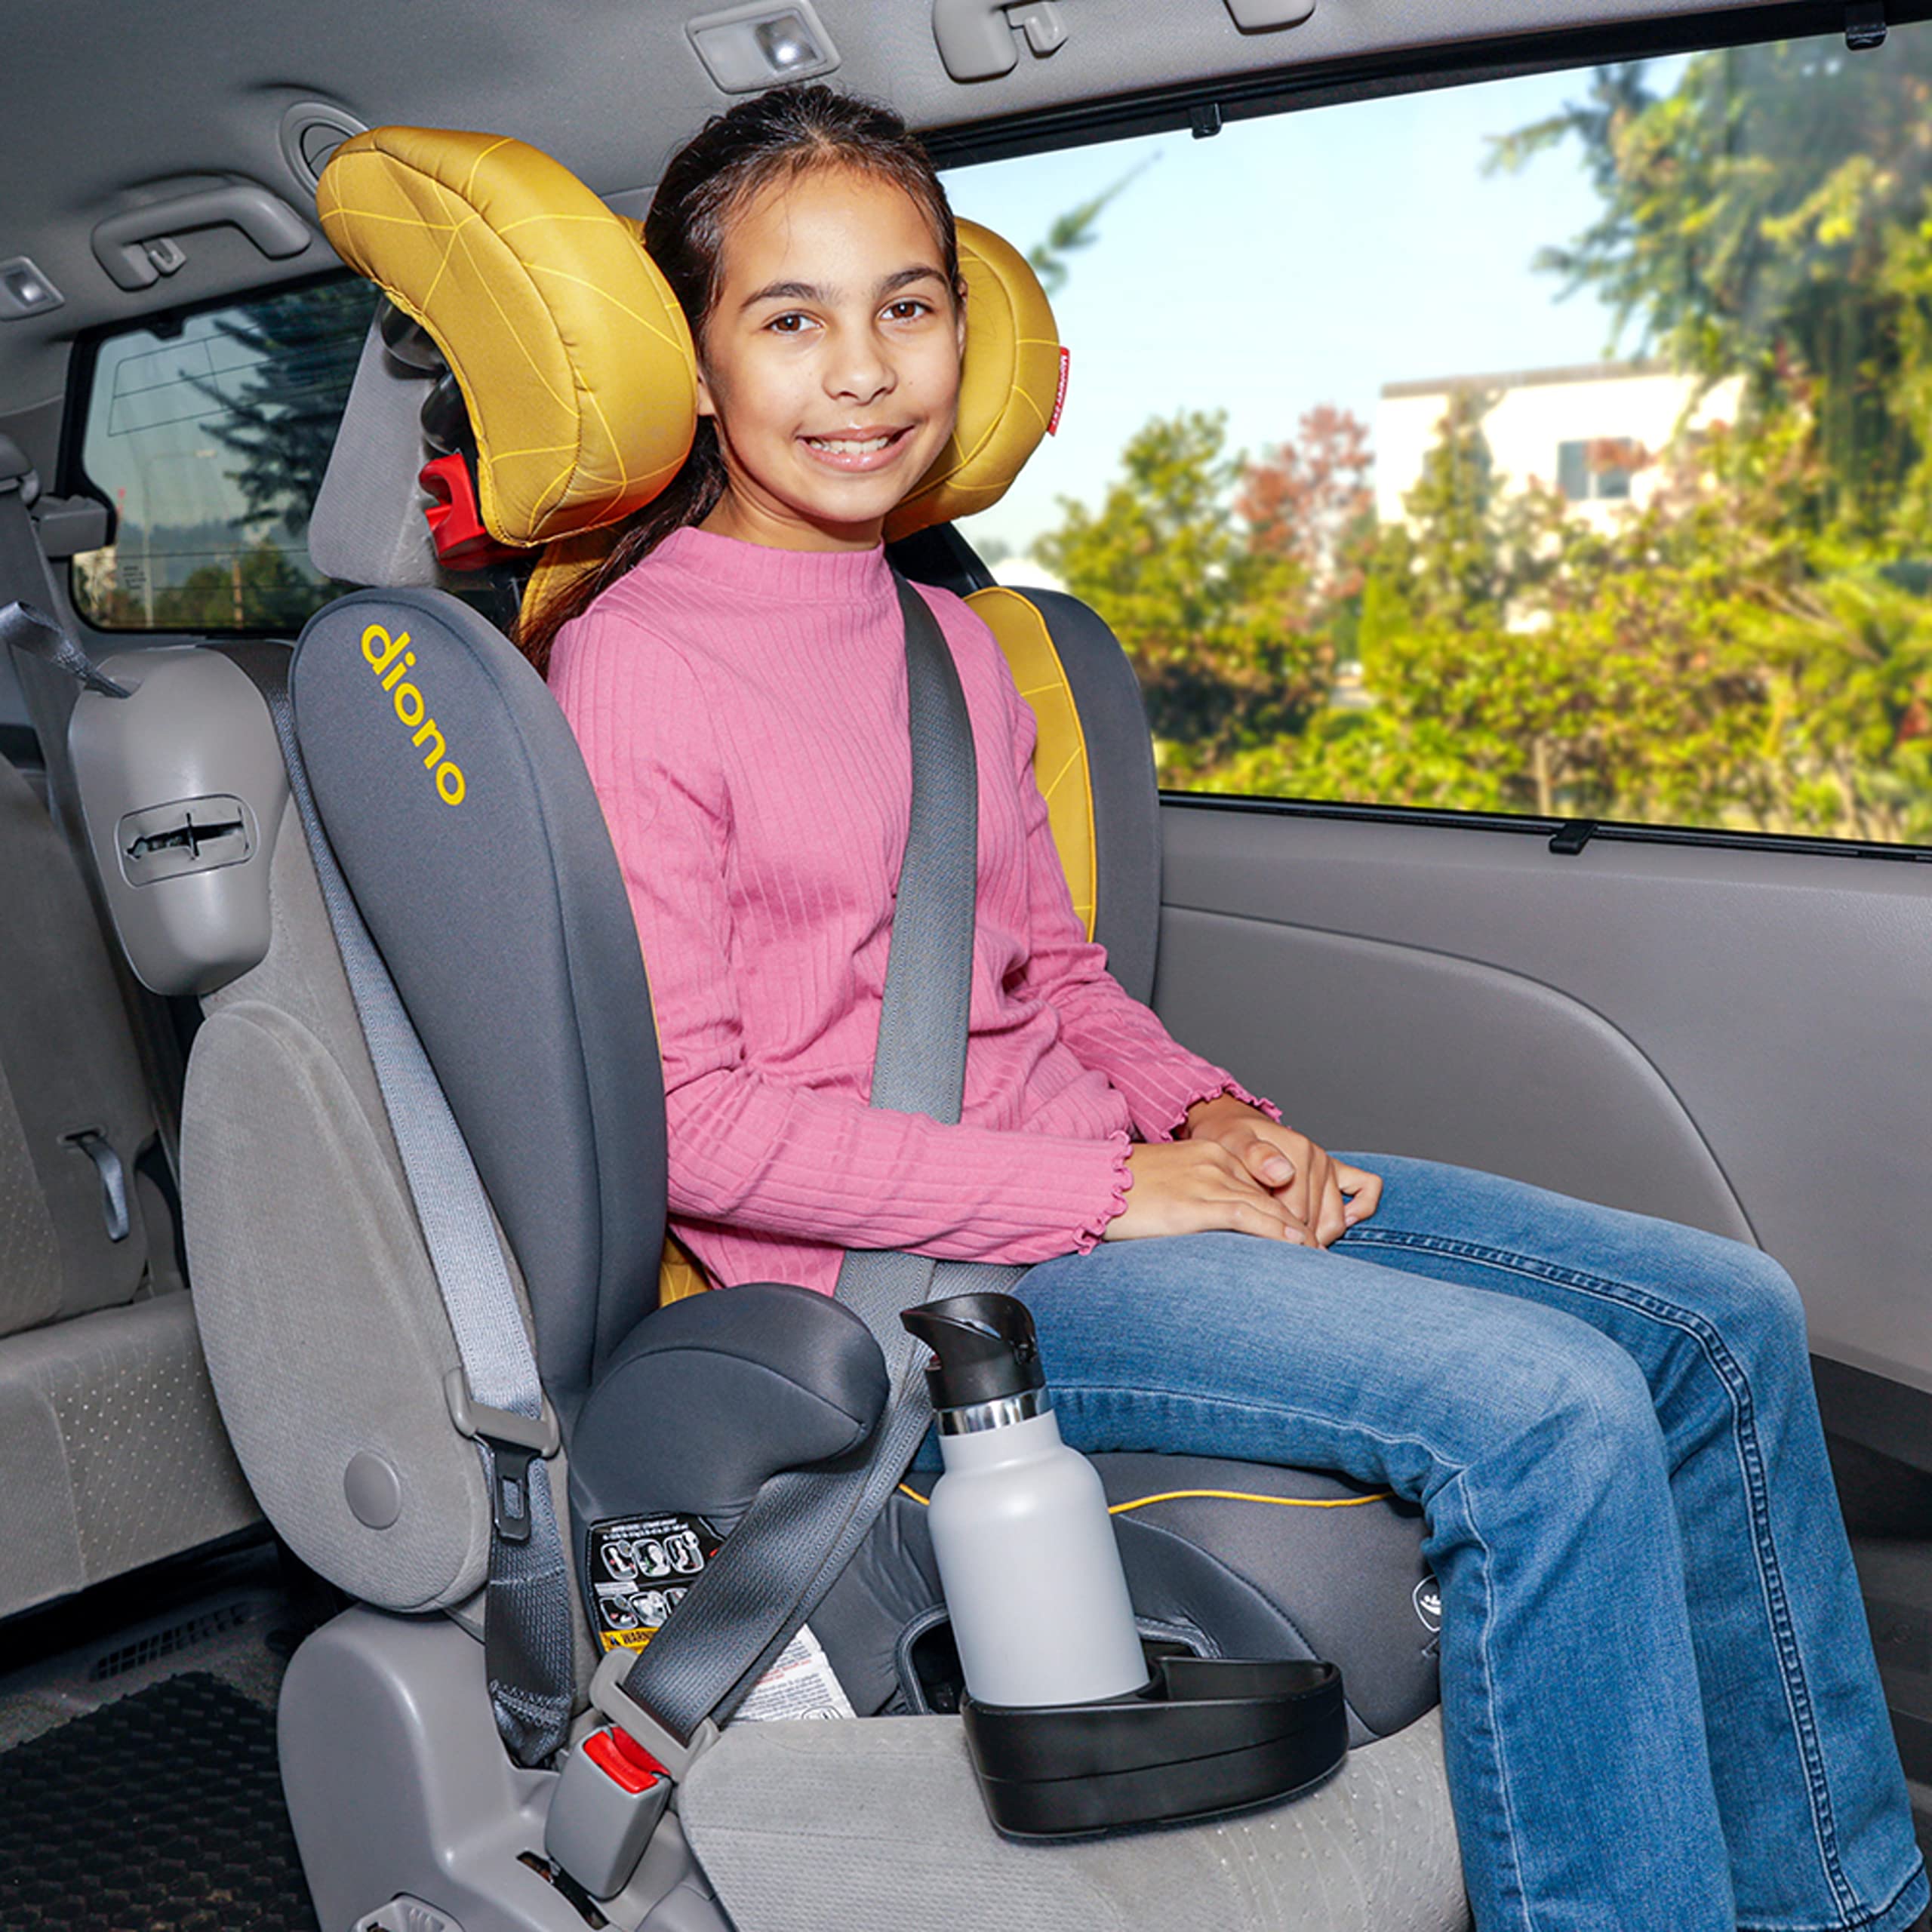 Diono Monterey 2XT Latch 2 in 1 High Back Booster Car Seat with Expandable Height & Width, Side Impact Protection, 8 Years 1 Booster, Yellow Sulphur